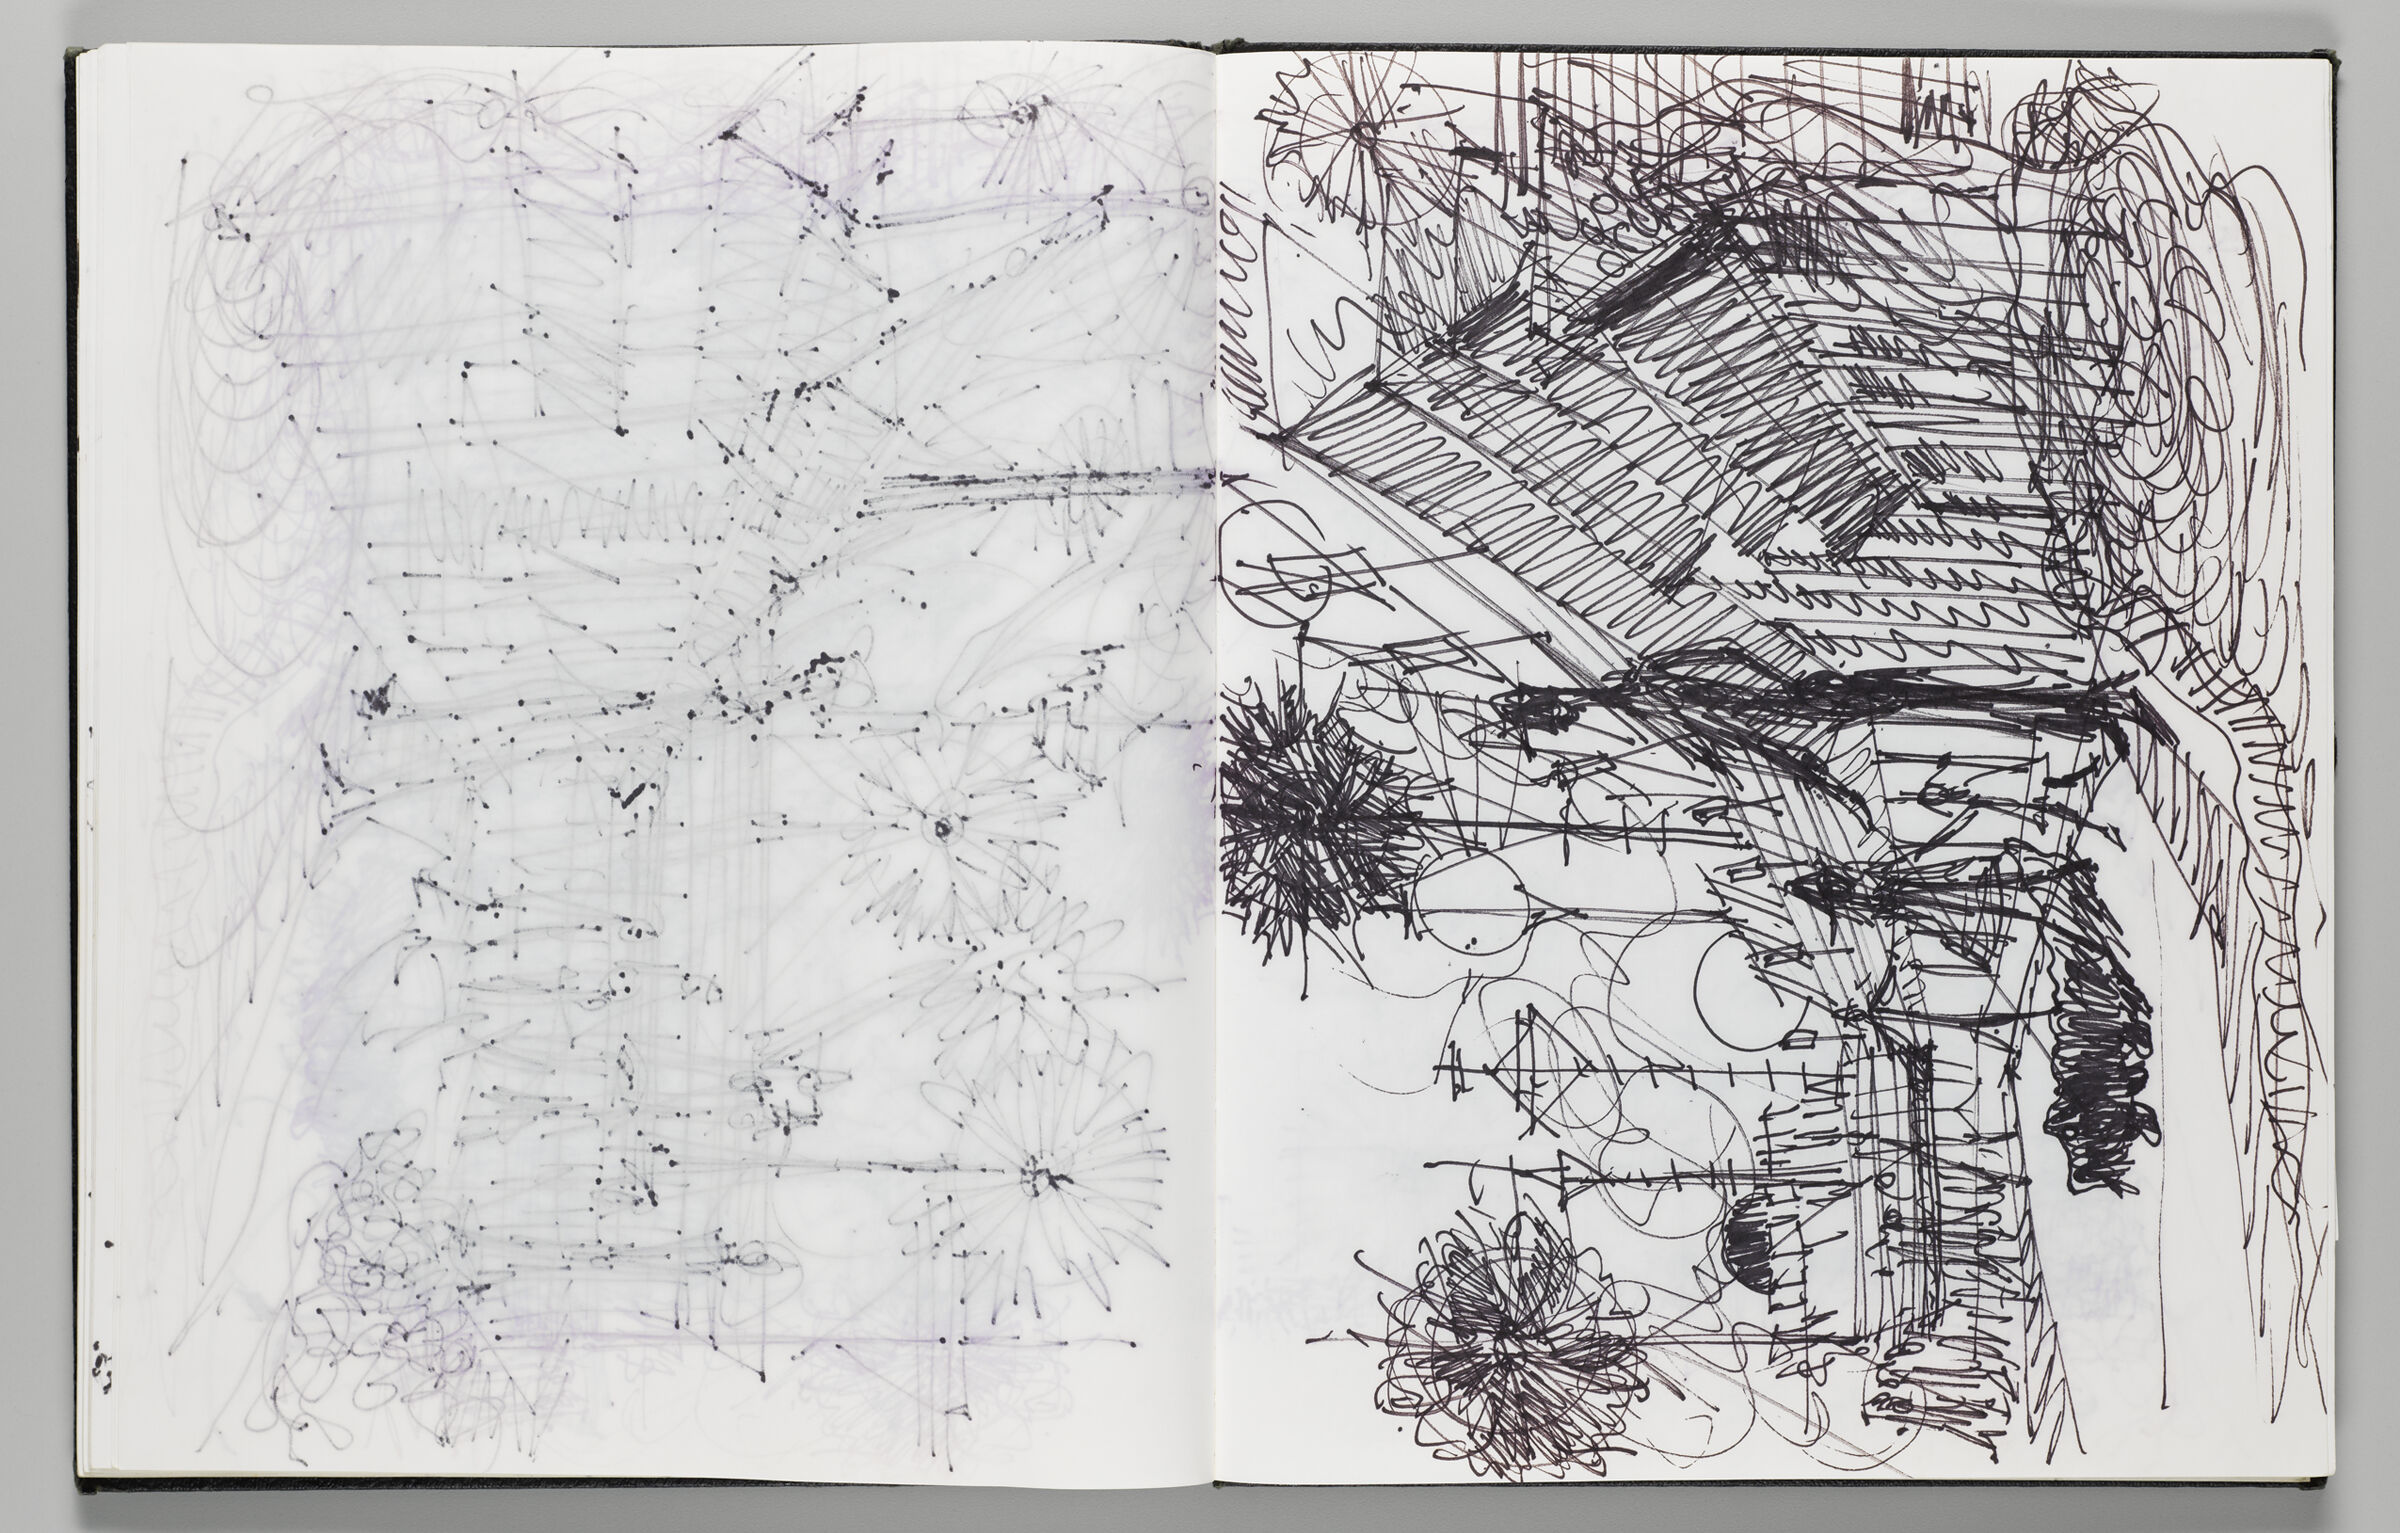 Untitled (Bleed-Through Of Previous Page And Color Transfer, Left Page); Untitled (Centerbeam Sketch, Right Page)